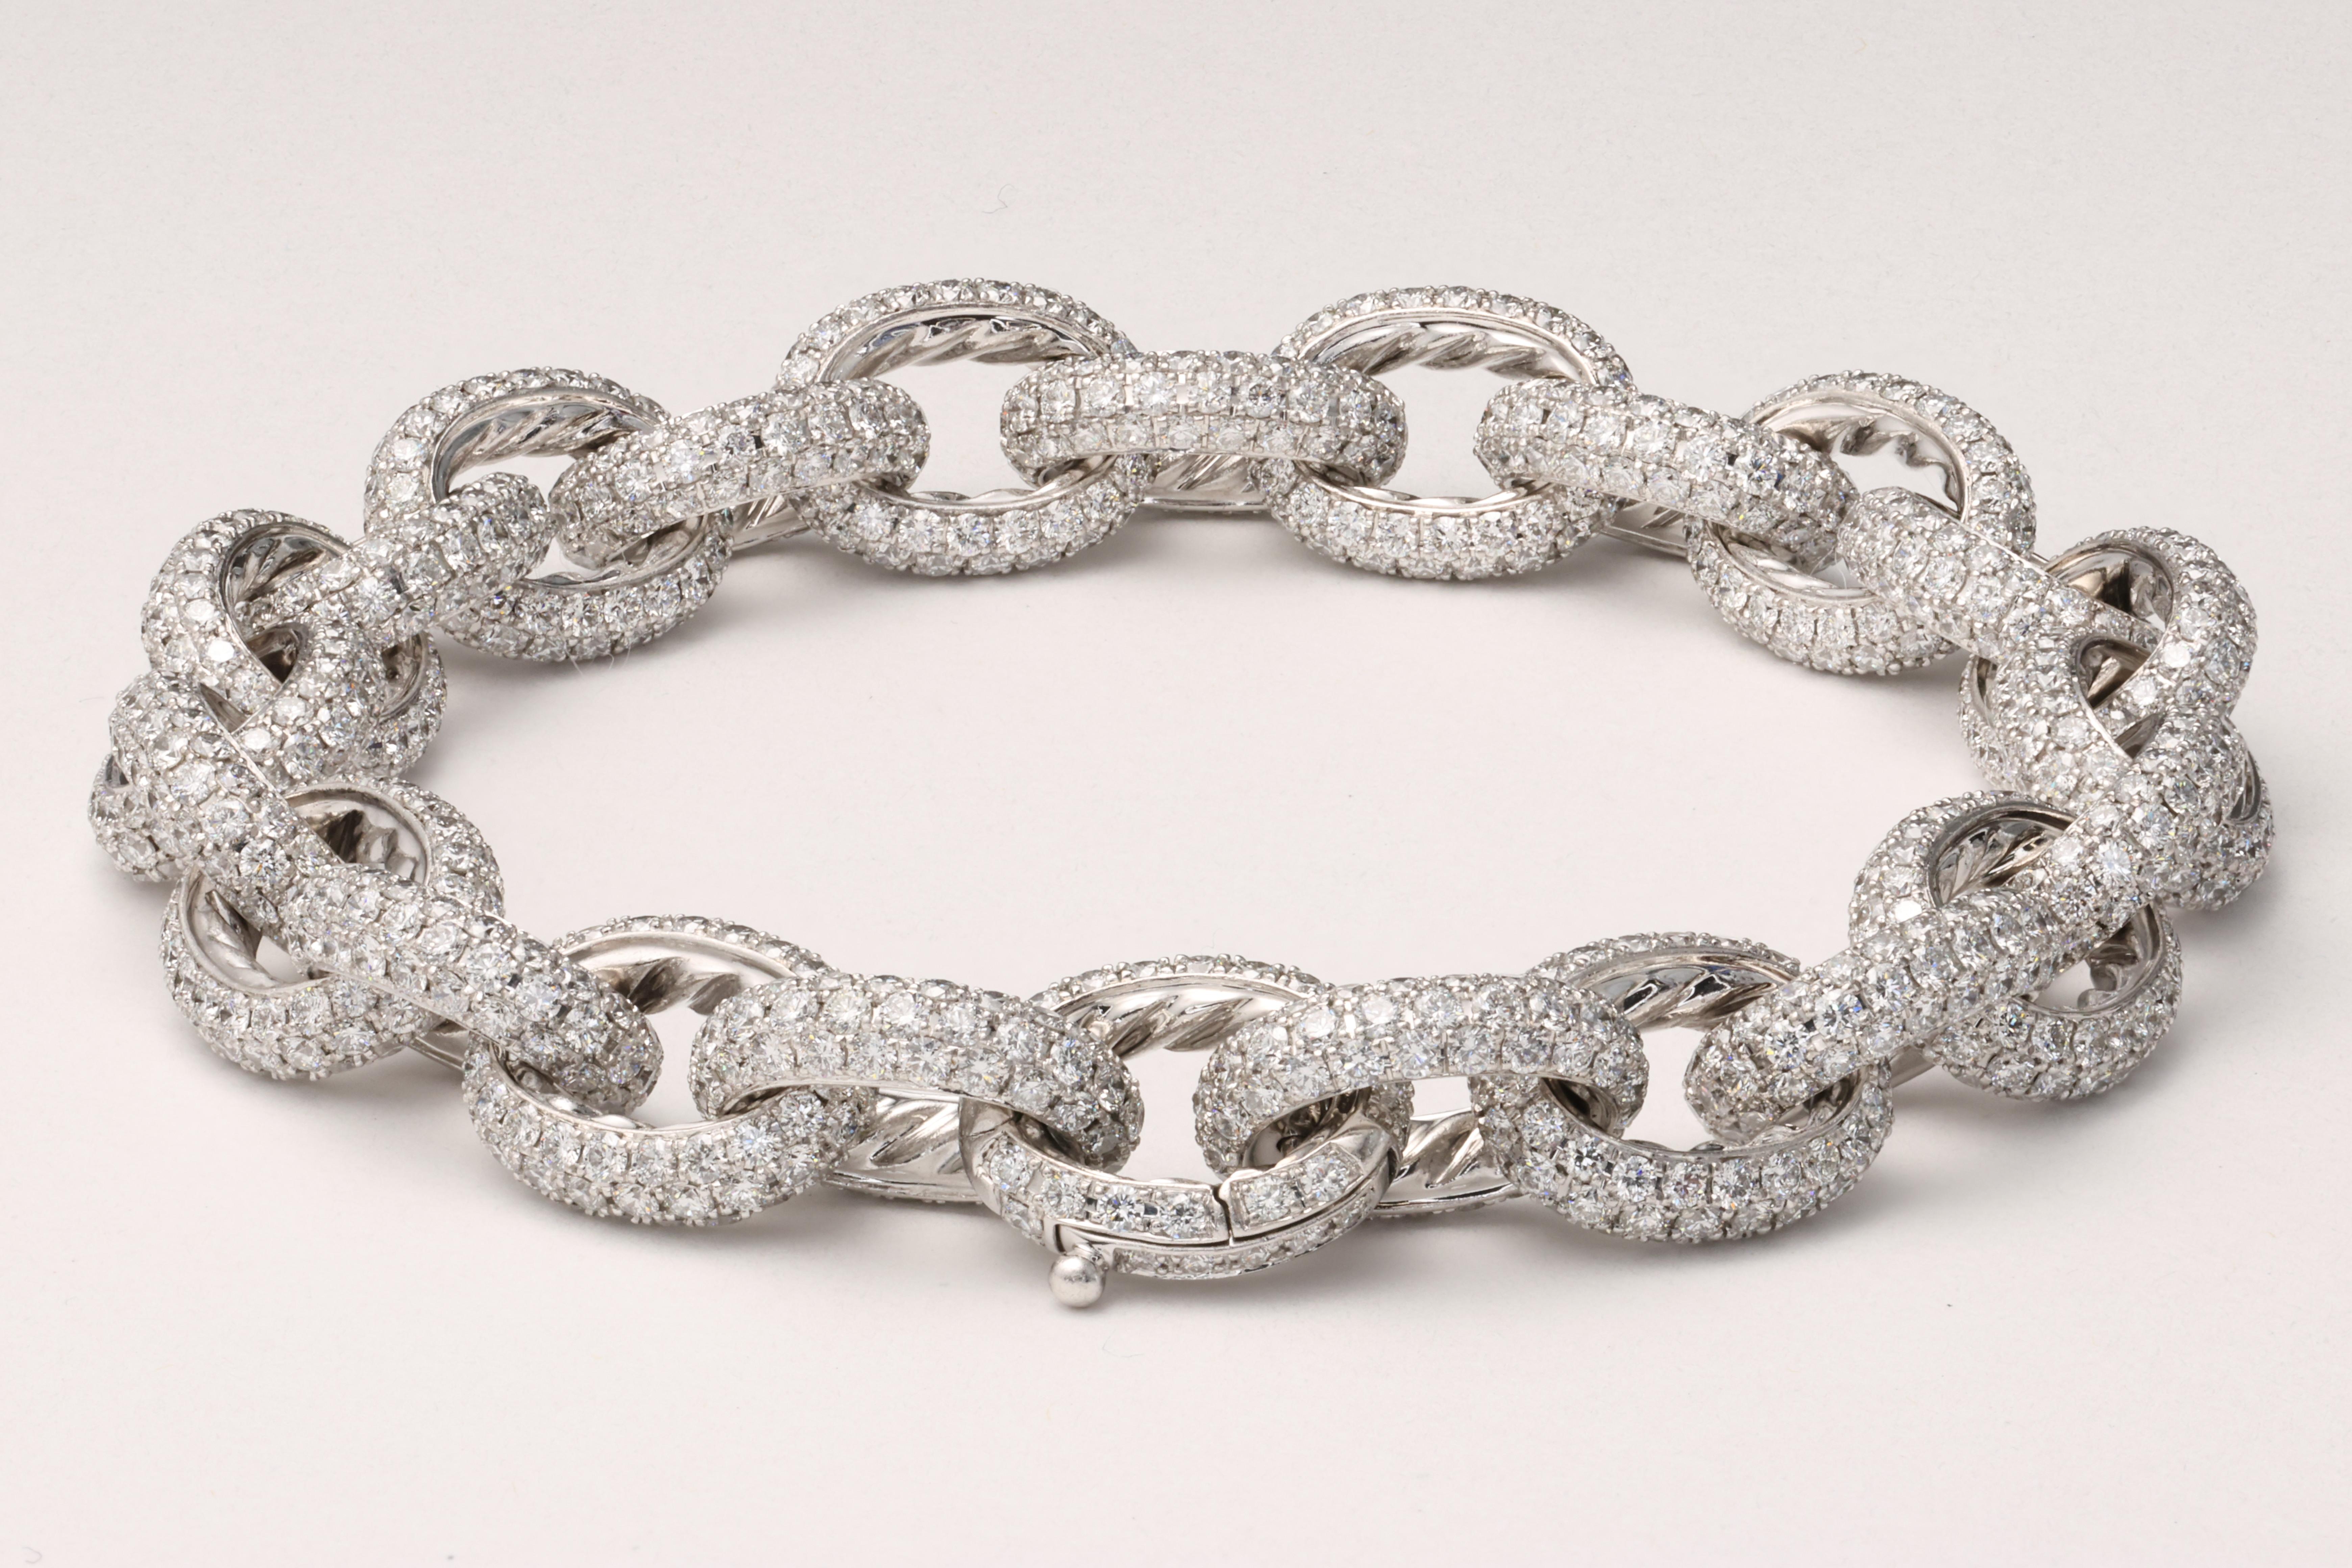 David Yurman Pave Chain Link Diamond Bracelet in 18 Karat White Gold In Excellent Condition For Sale In Tampa, FL